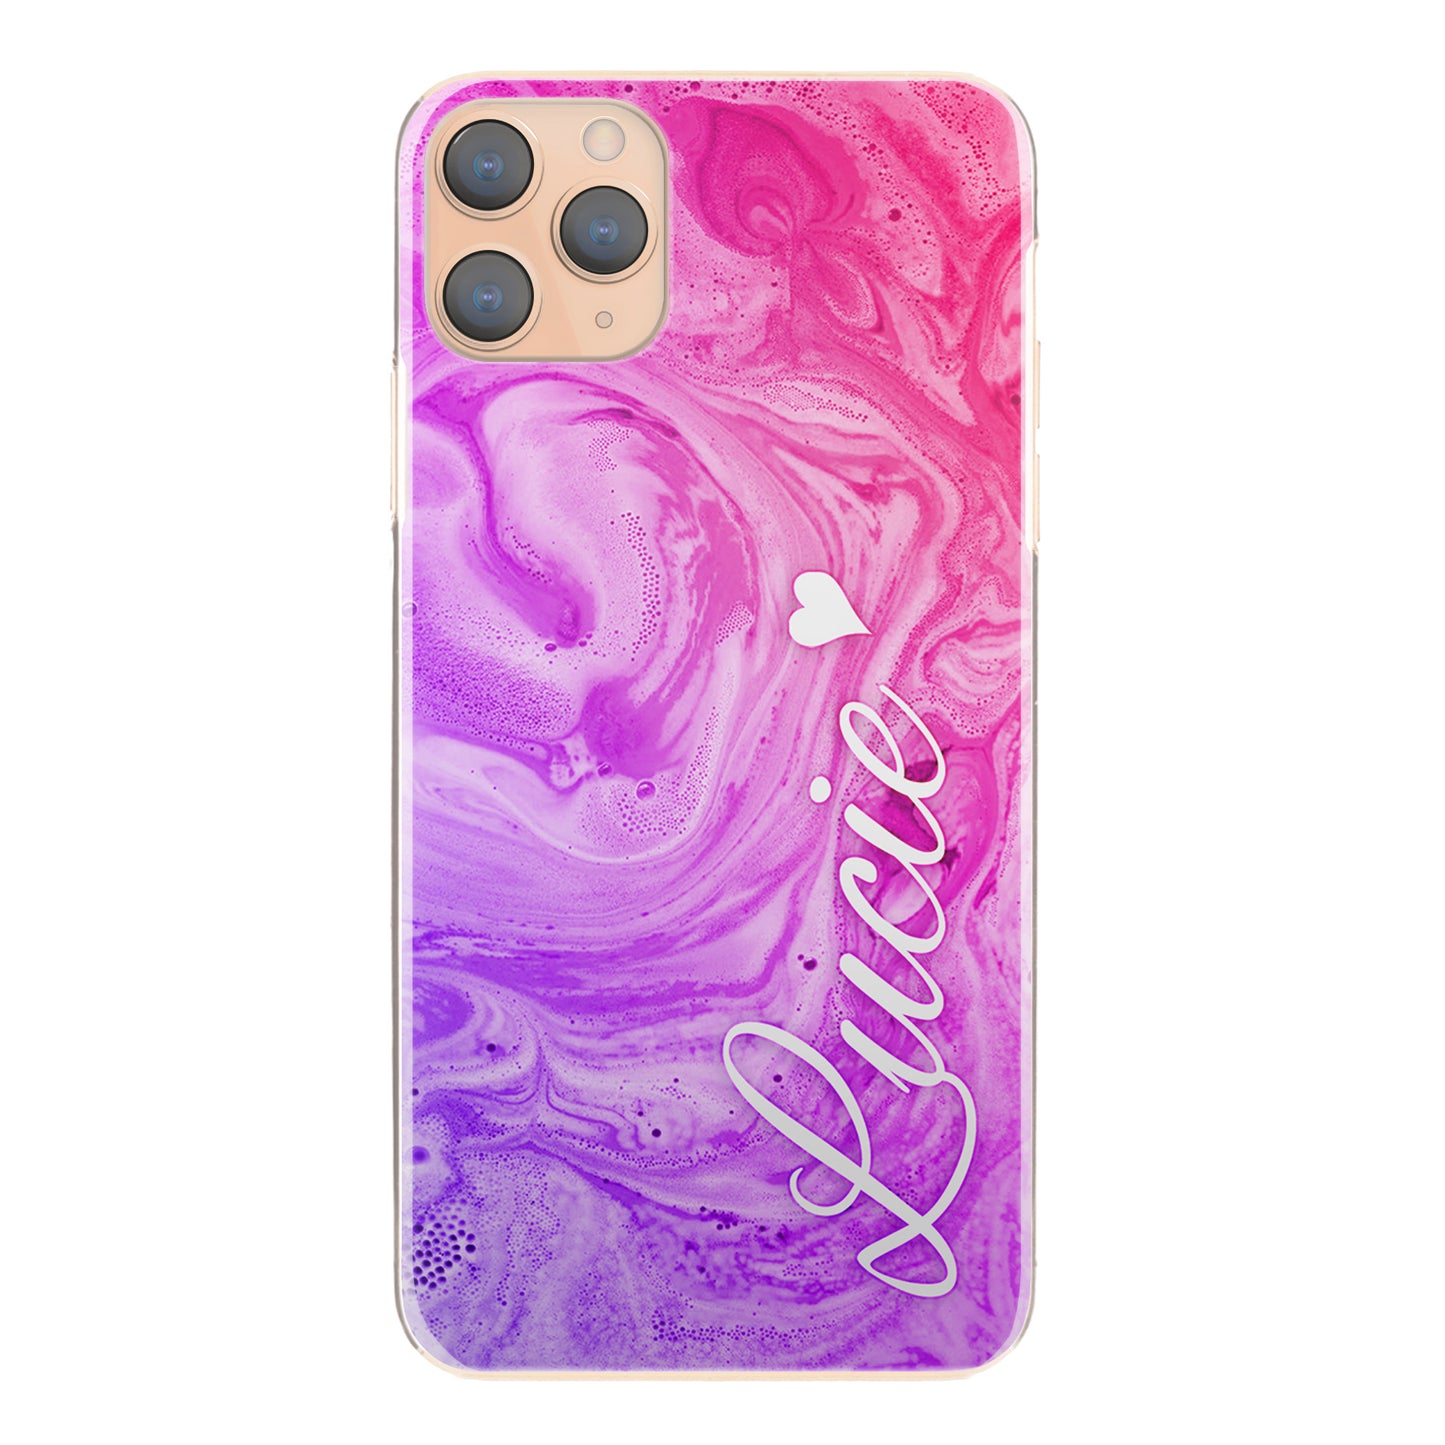 Personalised Motorola Phone Hard Case with Heart Accented Text on Purple Pink Gradient Swirled Marble